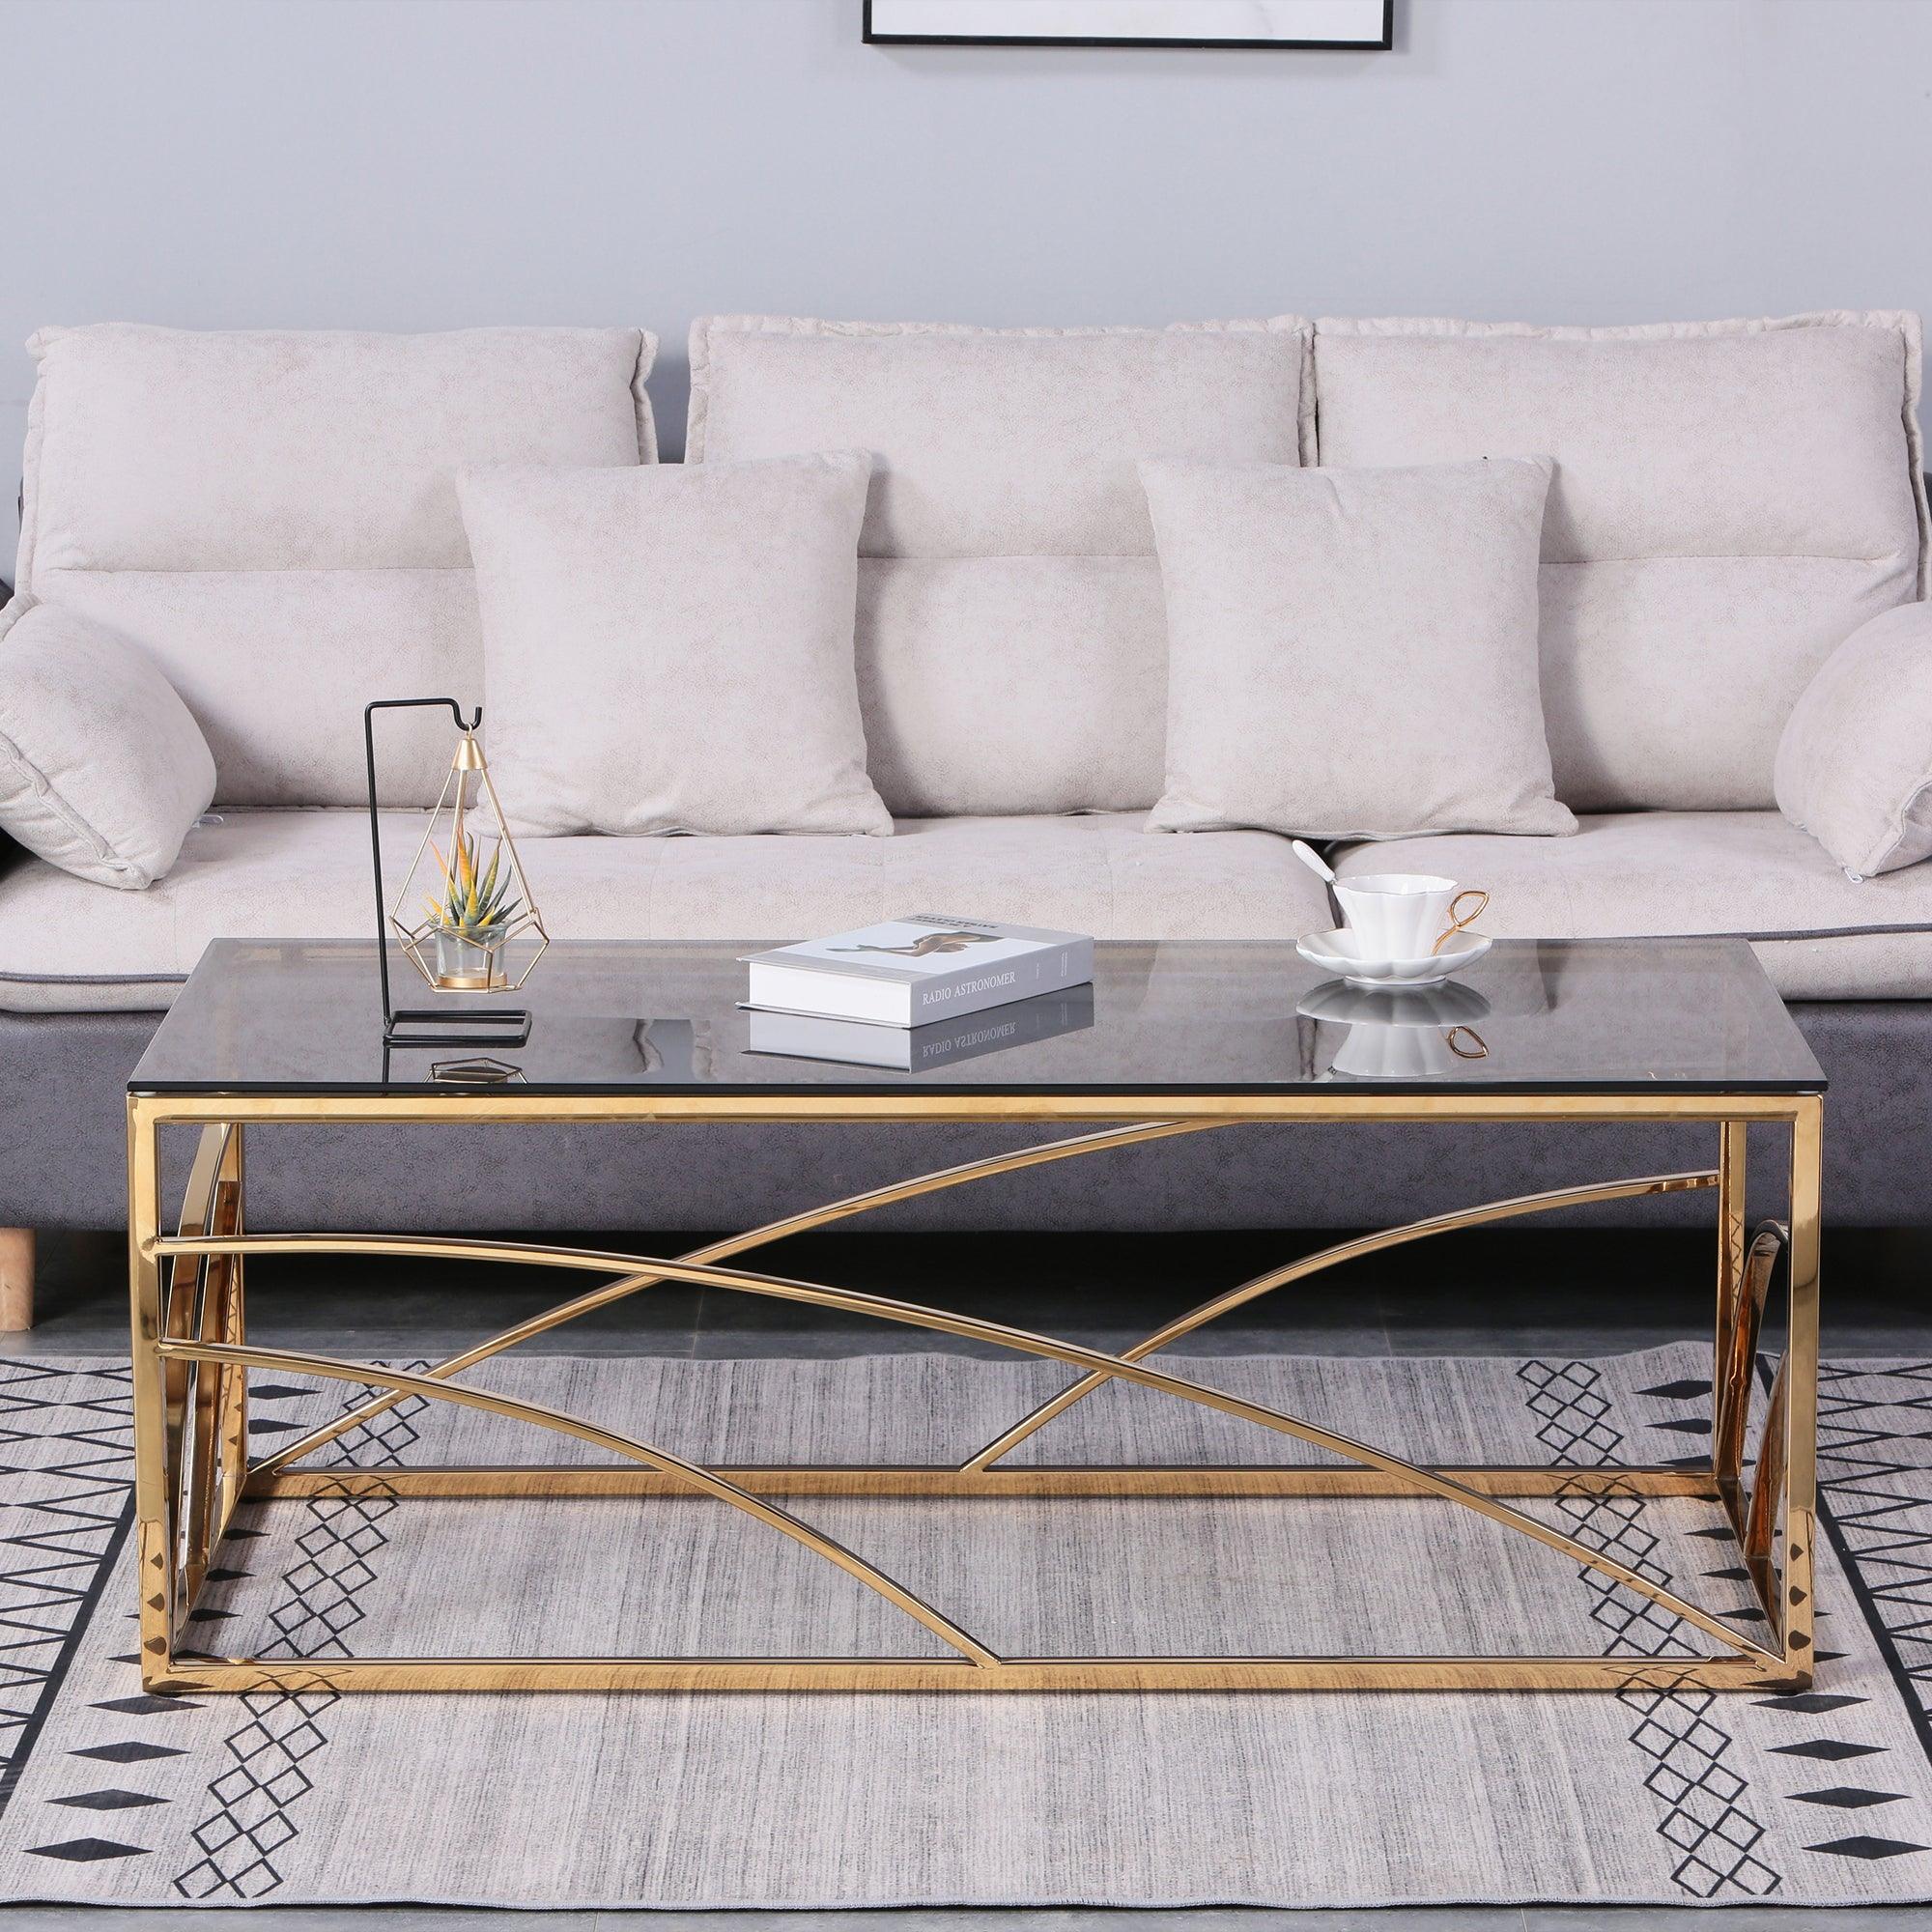 🆓🚛 46.8" Modern Stainless Steel Rectangular Accent Glass Coffee Table for Living Room, Blue Gray Tempered Glass, Gold Frame